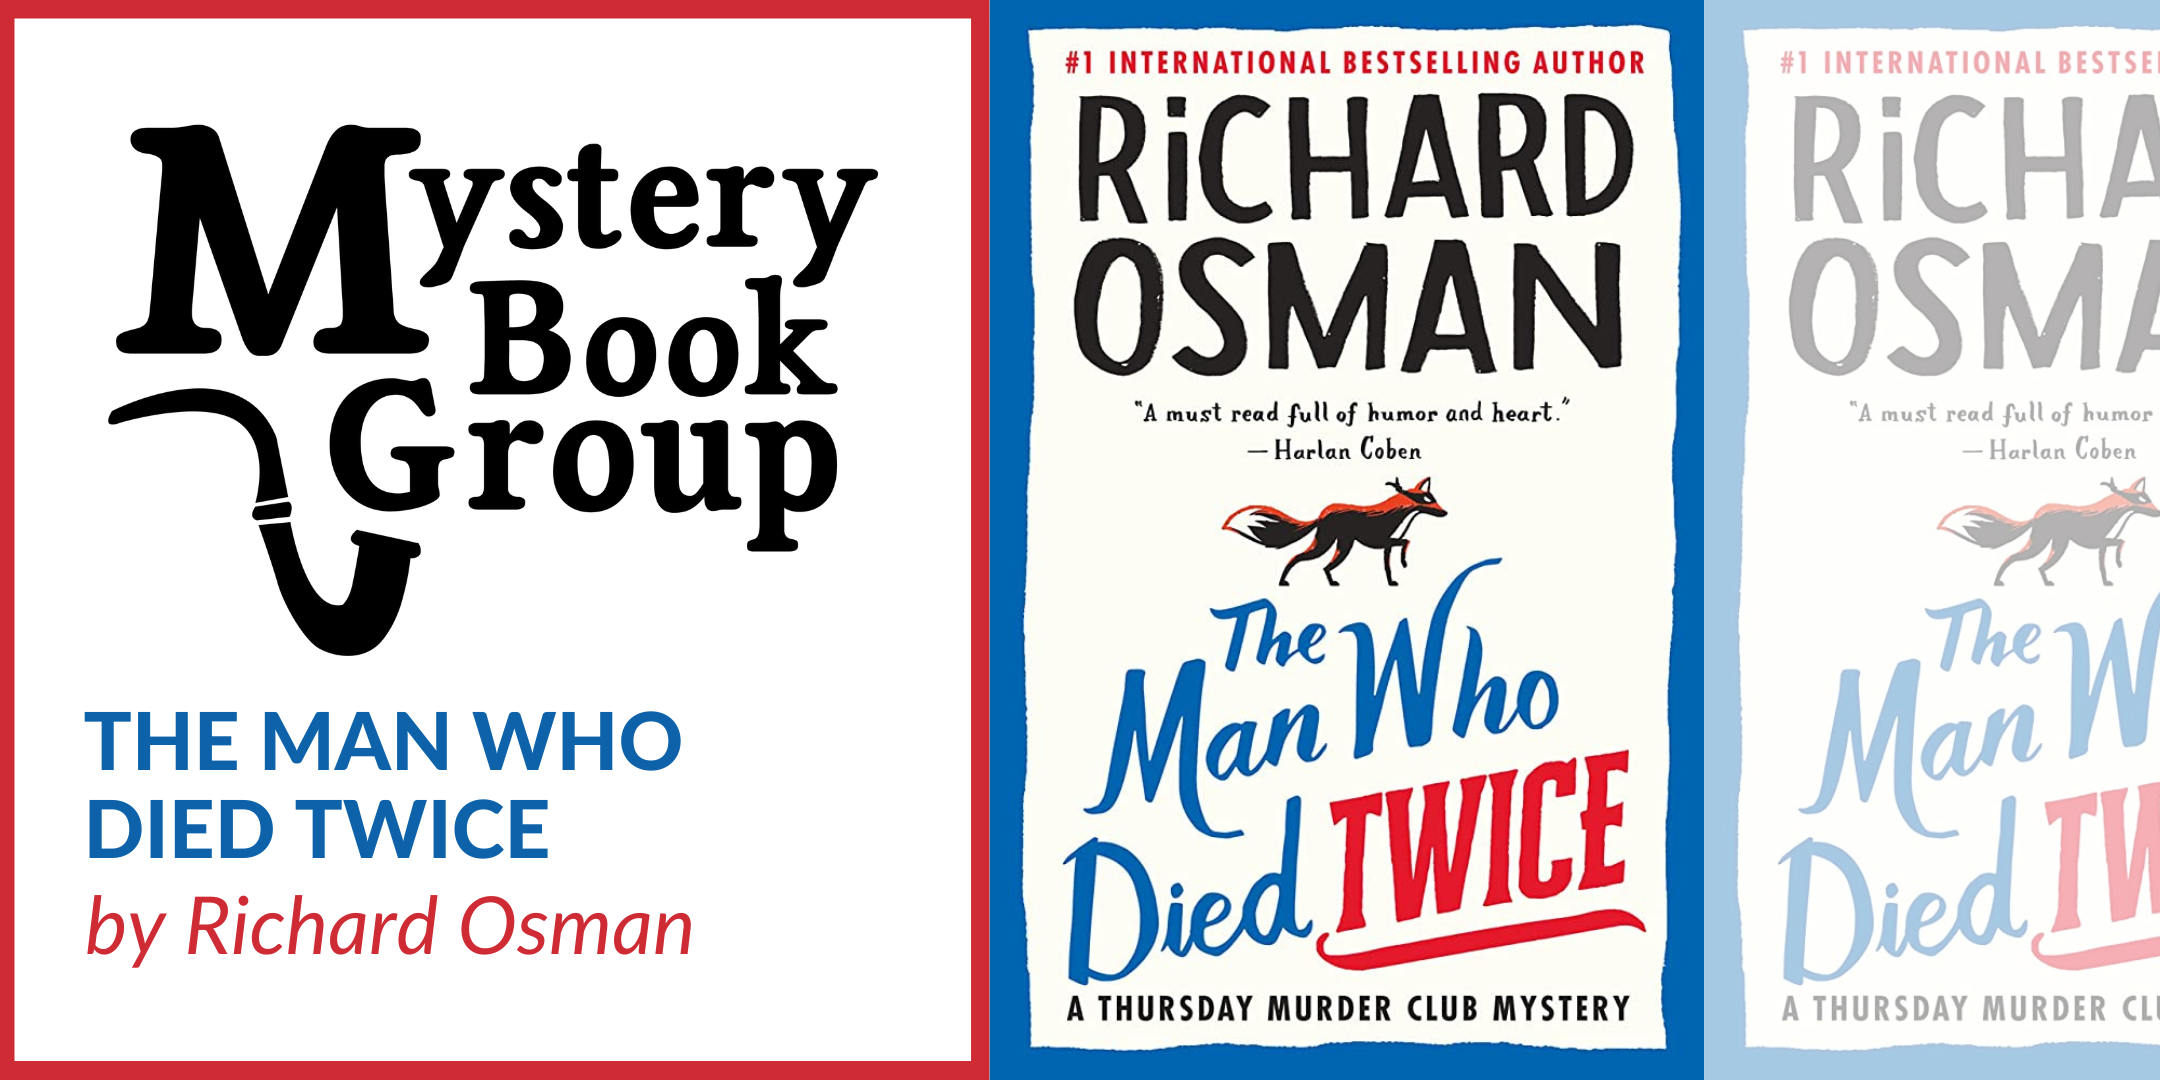 image of "Mystery Book Group: The Main Who Died Twice"